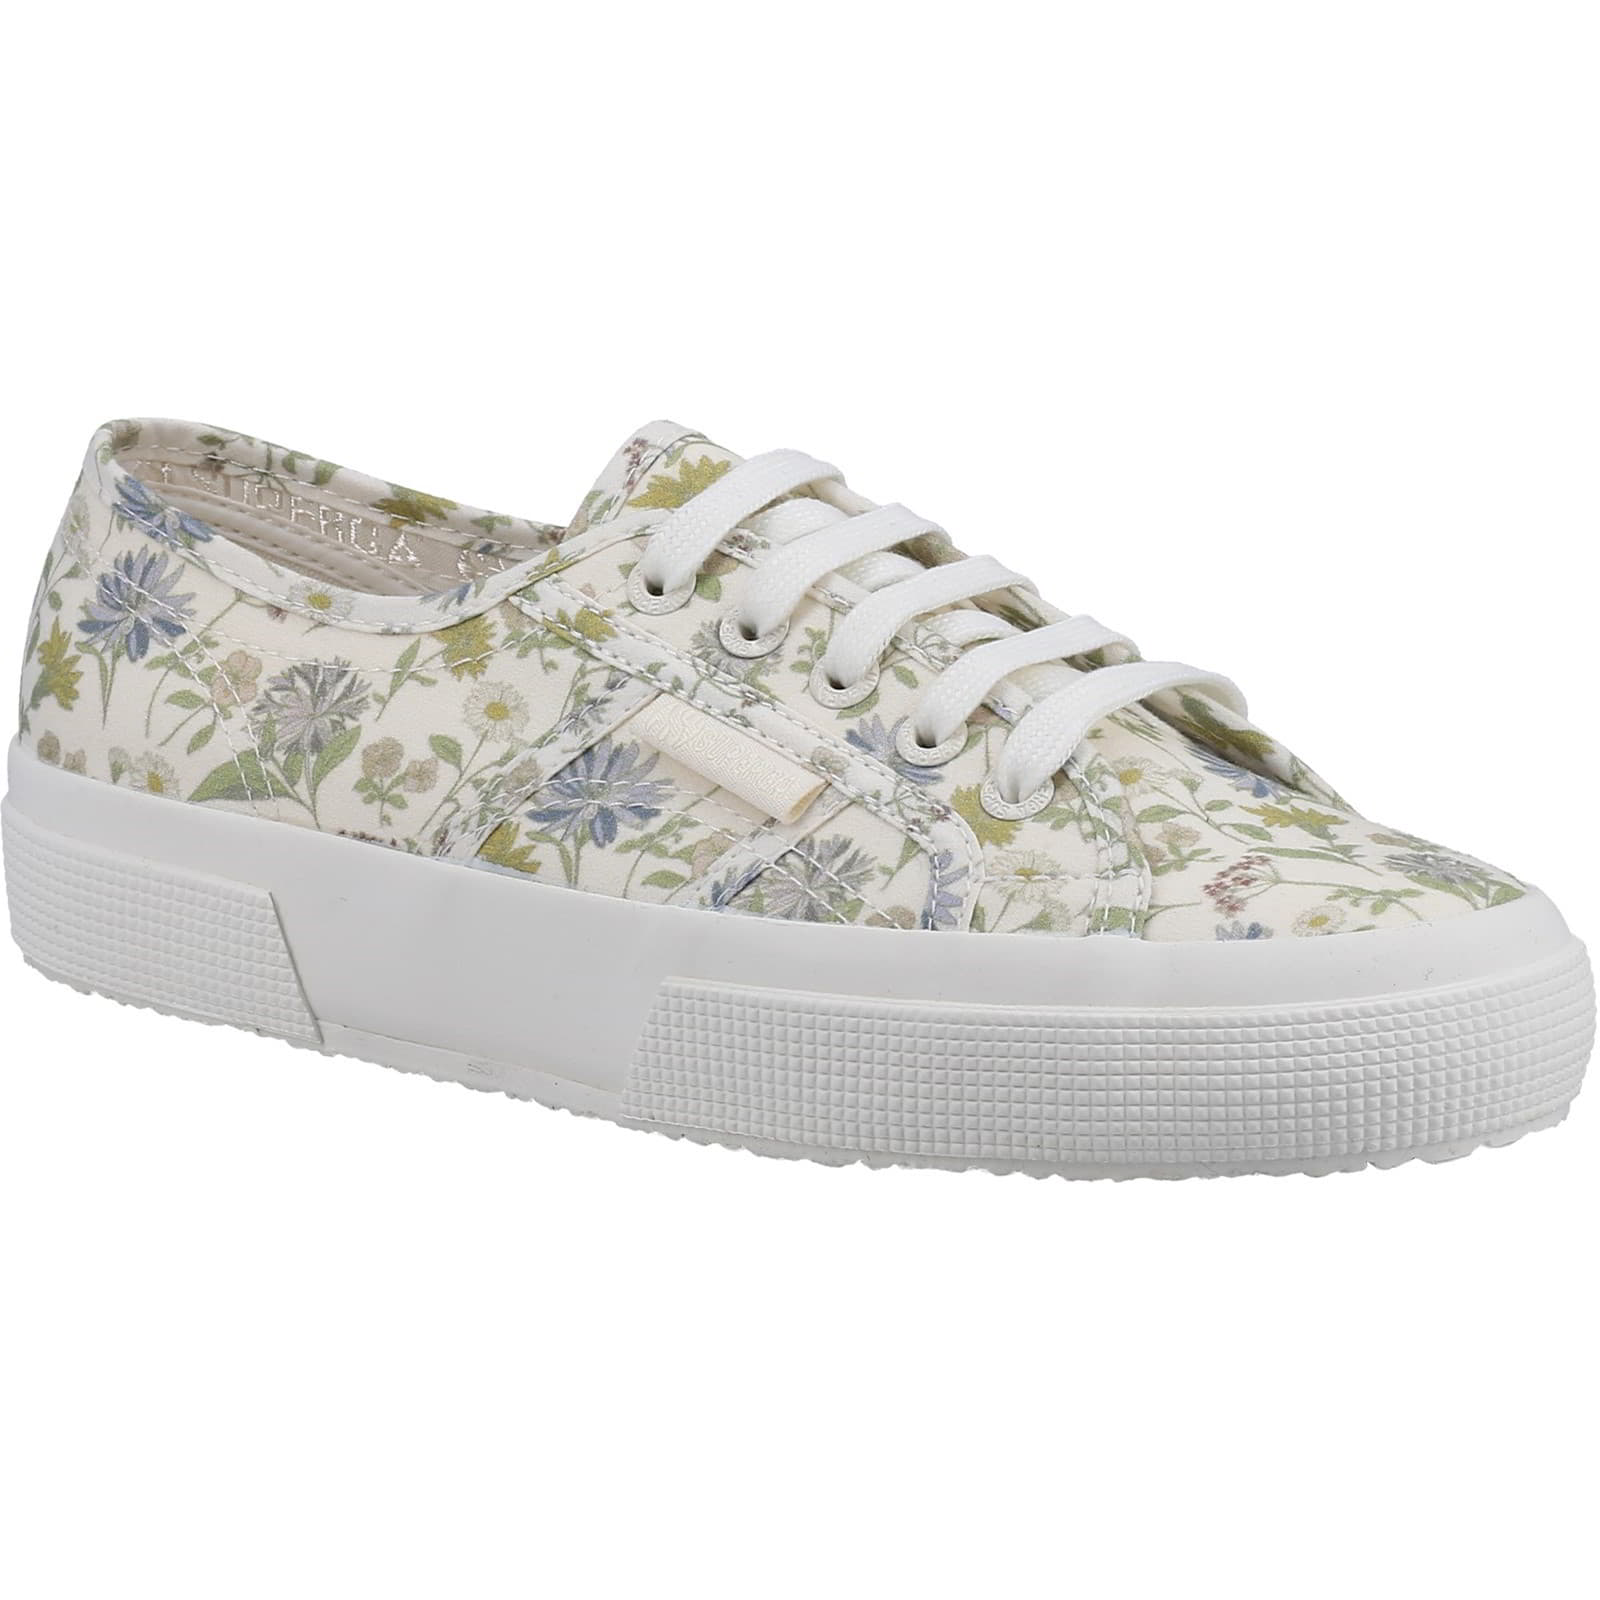 Superga Women's 2750 Floral Print Lace Up Trainers Shoes - UK 4.5